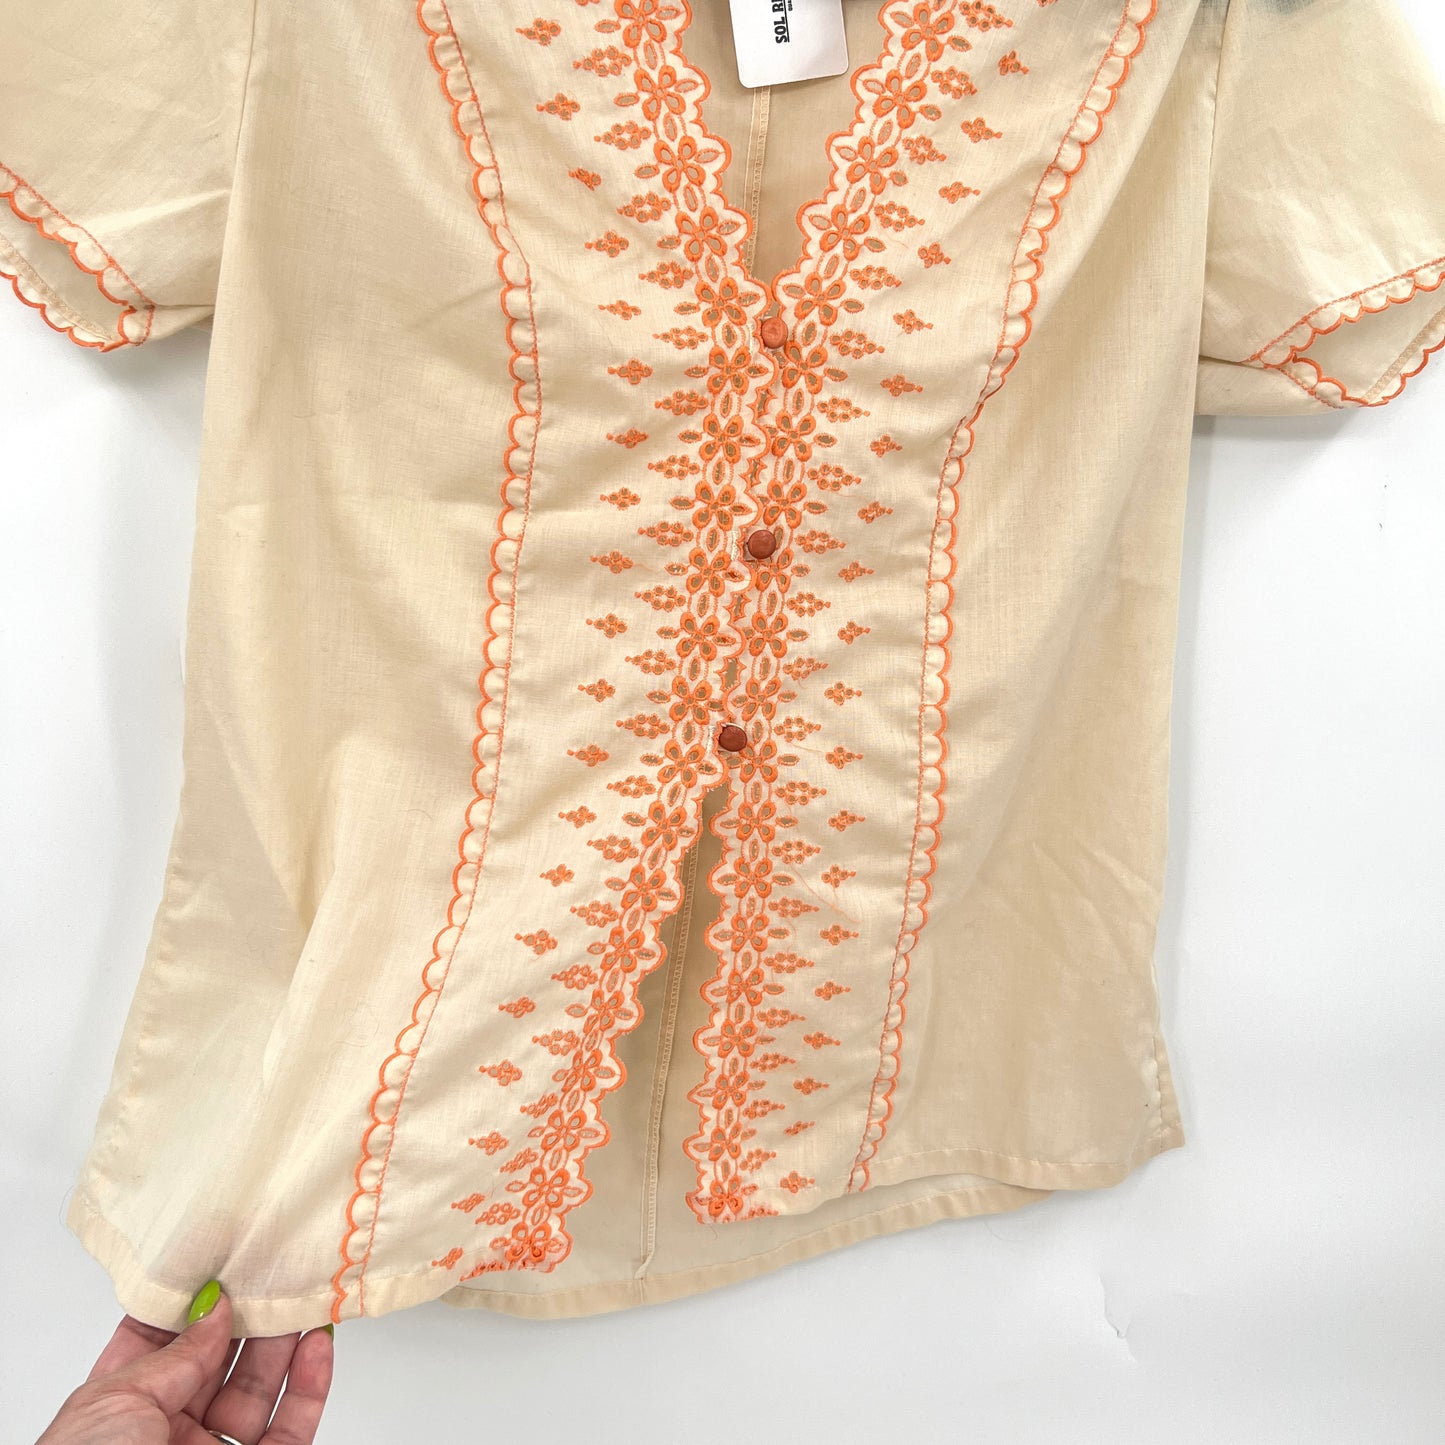 Vintage Triumph Sheer Embroidered Top S